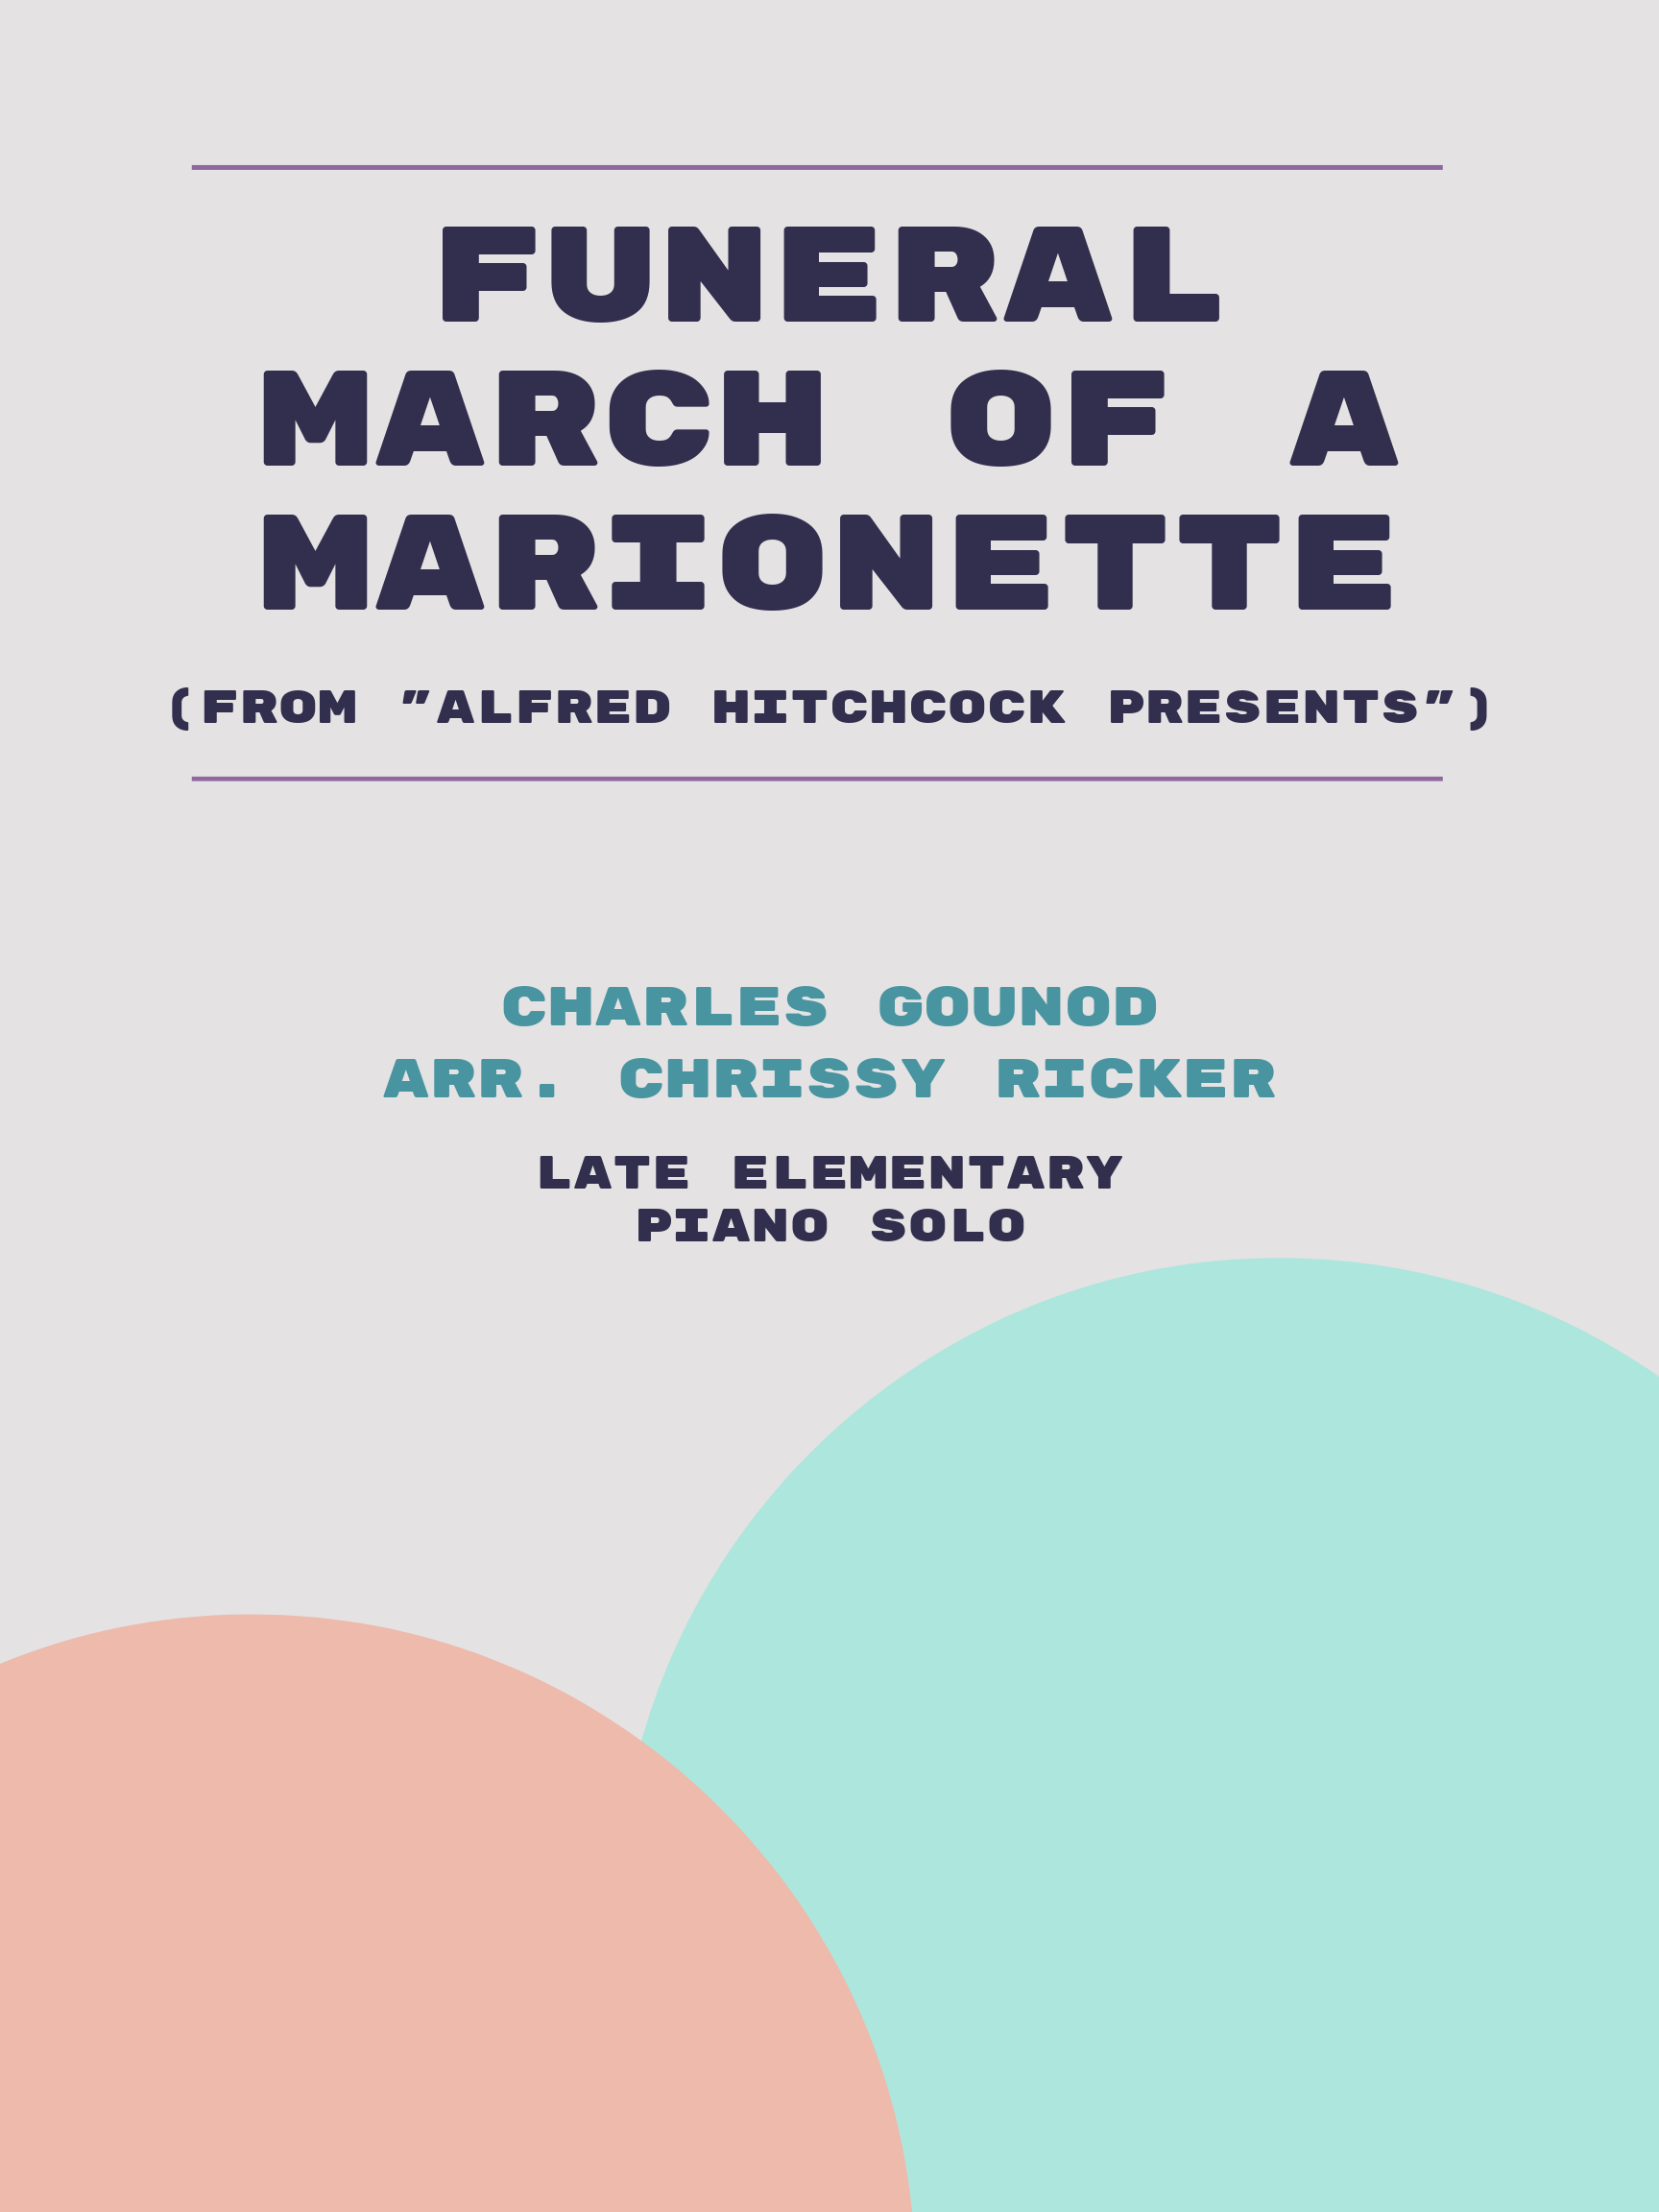 Funeral March of a Marionette by Charles Gounod